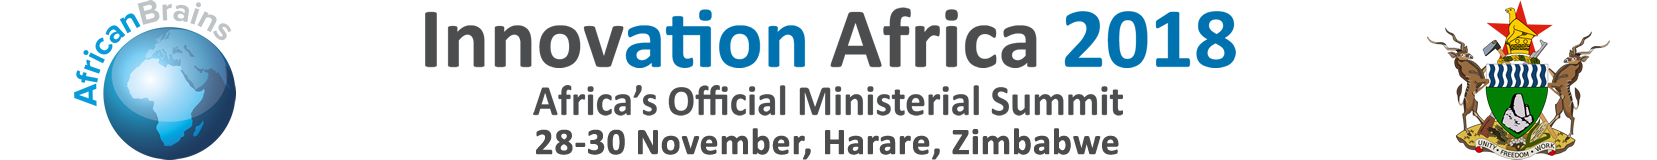 Africa's Official Ministerial Summit - November 2018, Harare, Zimbabwe